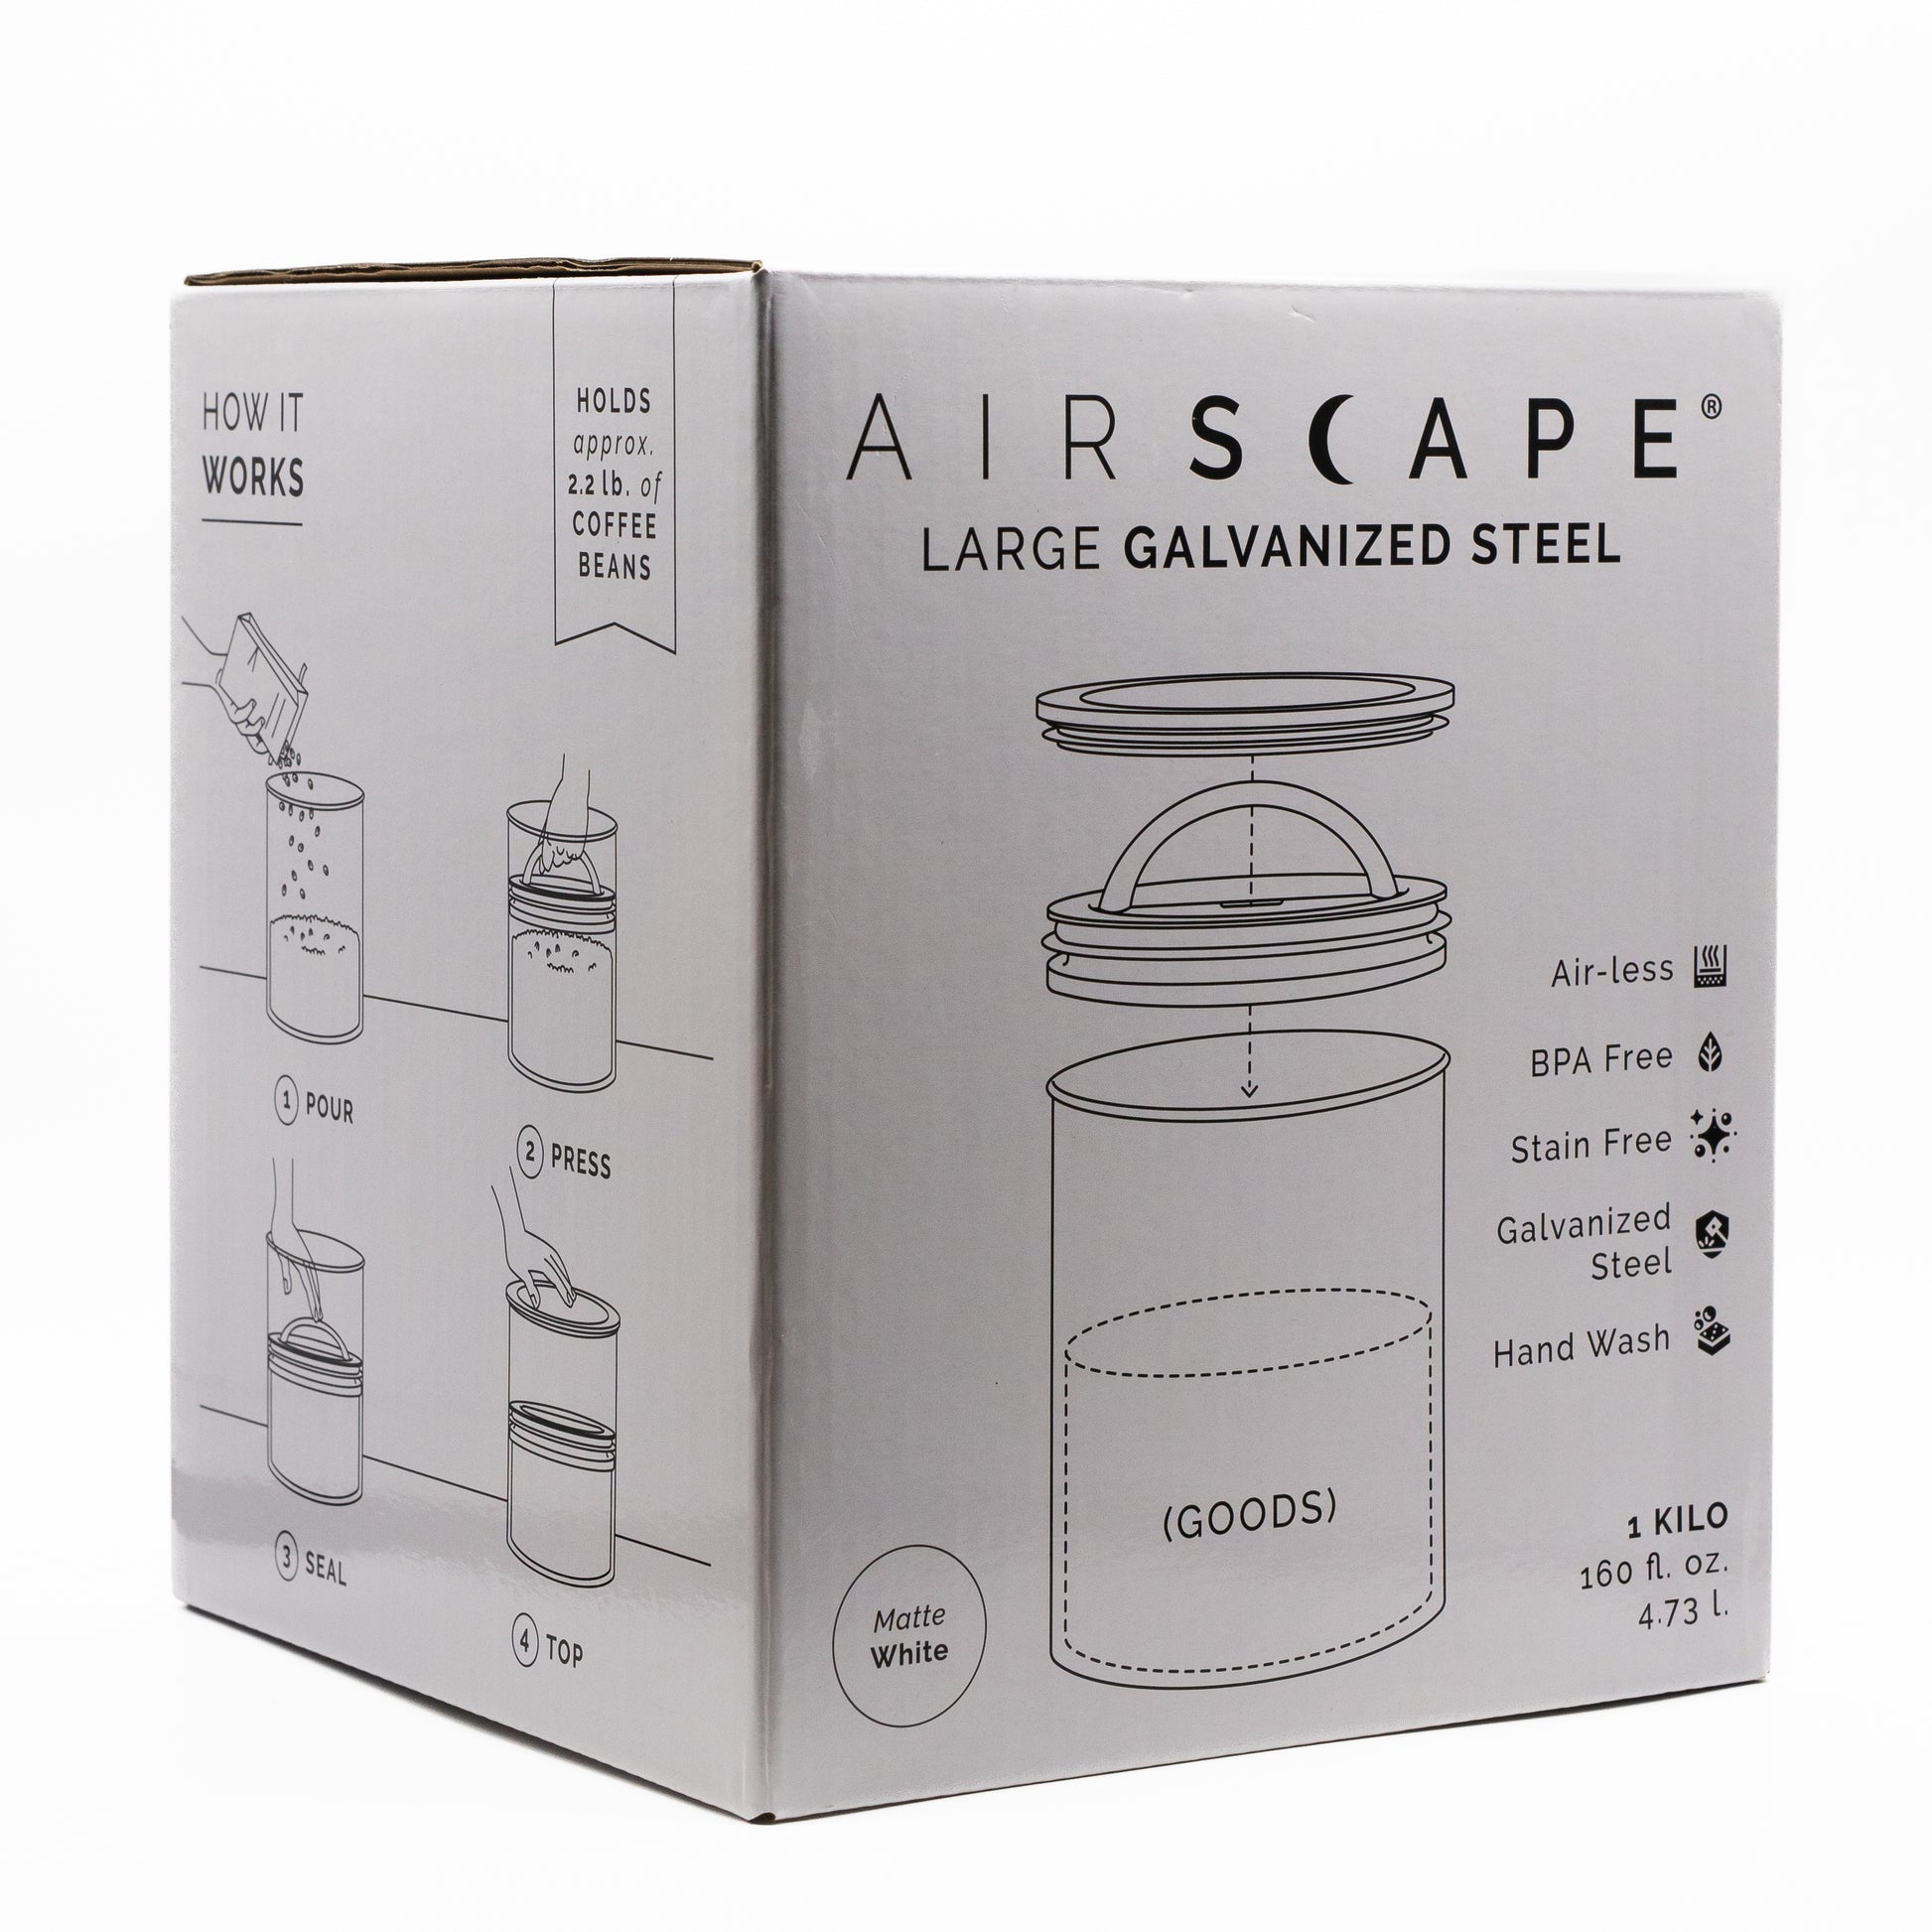 Airscape Kilo 8" Large Coffee Canister + 500g of the wanderer coffee. - dhc coffee co.